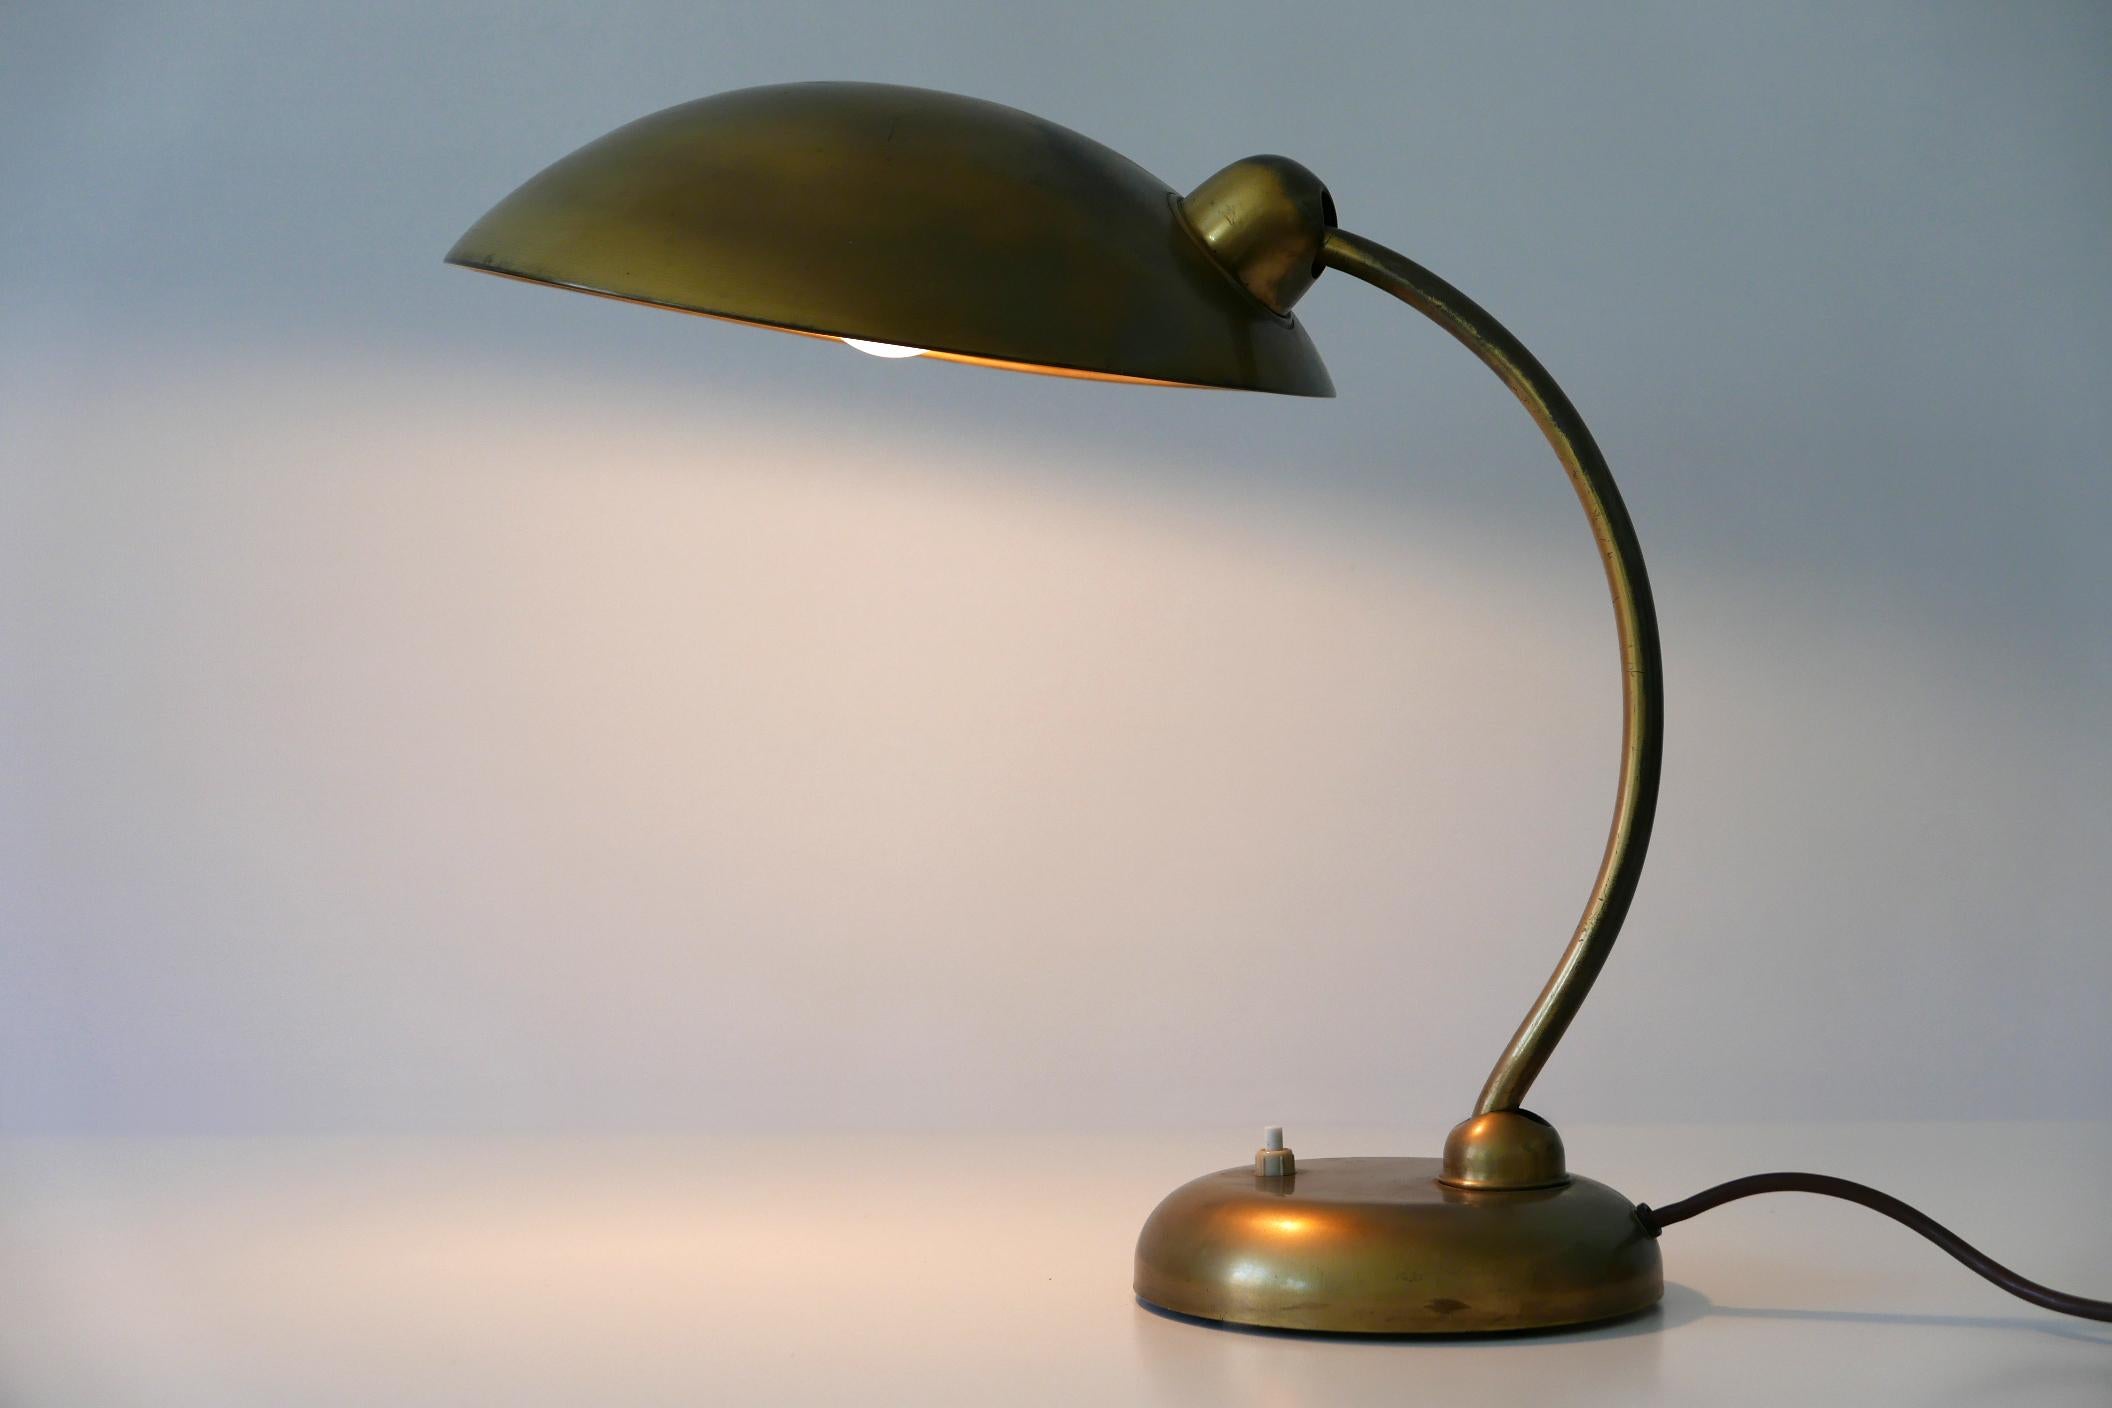 Rare and elegant Mid-Century Modern desk light or table lamp. Designed and manufactured in 1950s, Germany.

Executed in brass, the lamp needs 1 x E27 Edison screw fit bulb, is wired and in working condition. It runs both on 110 / 230